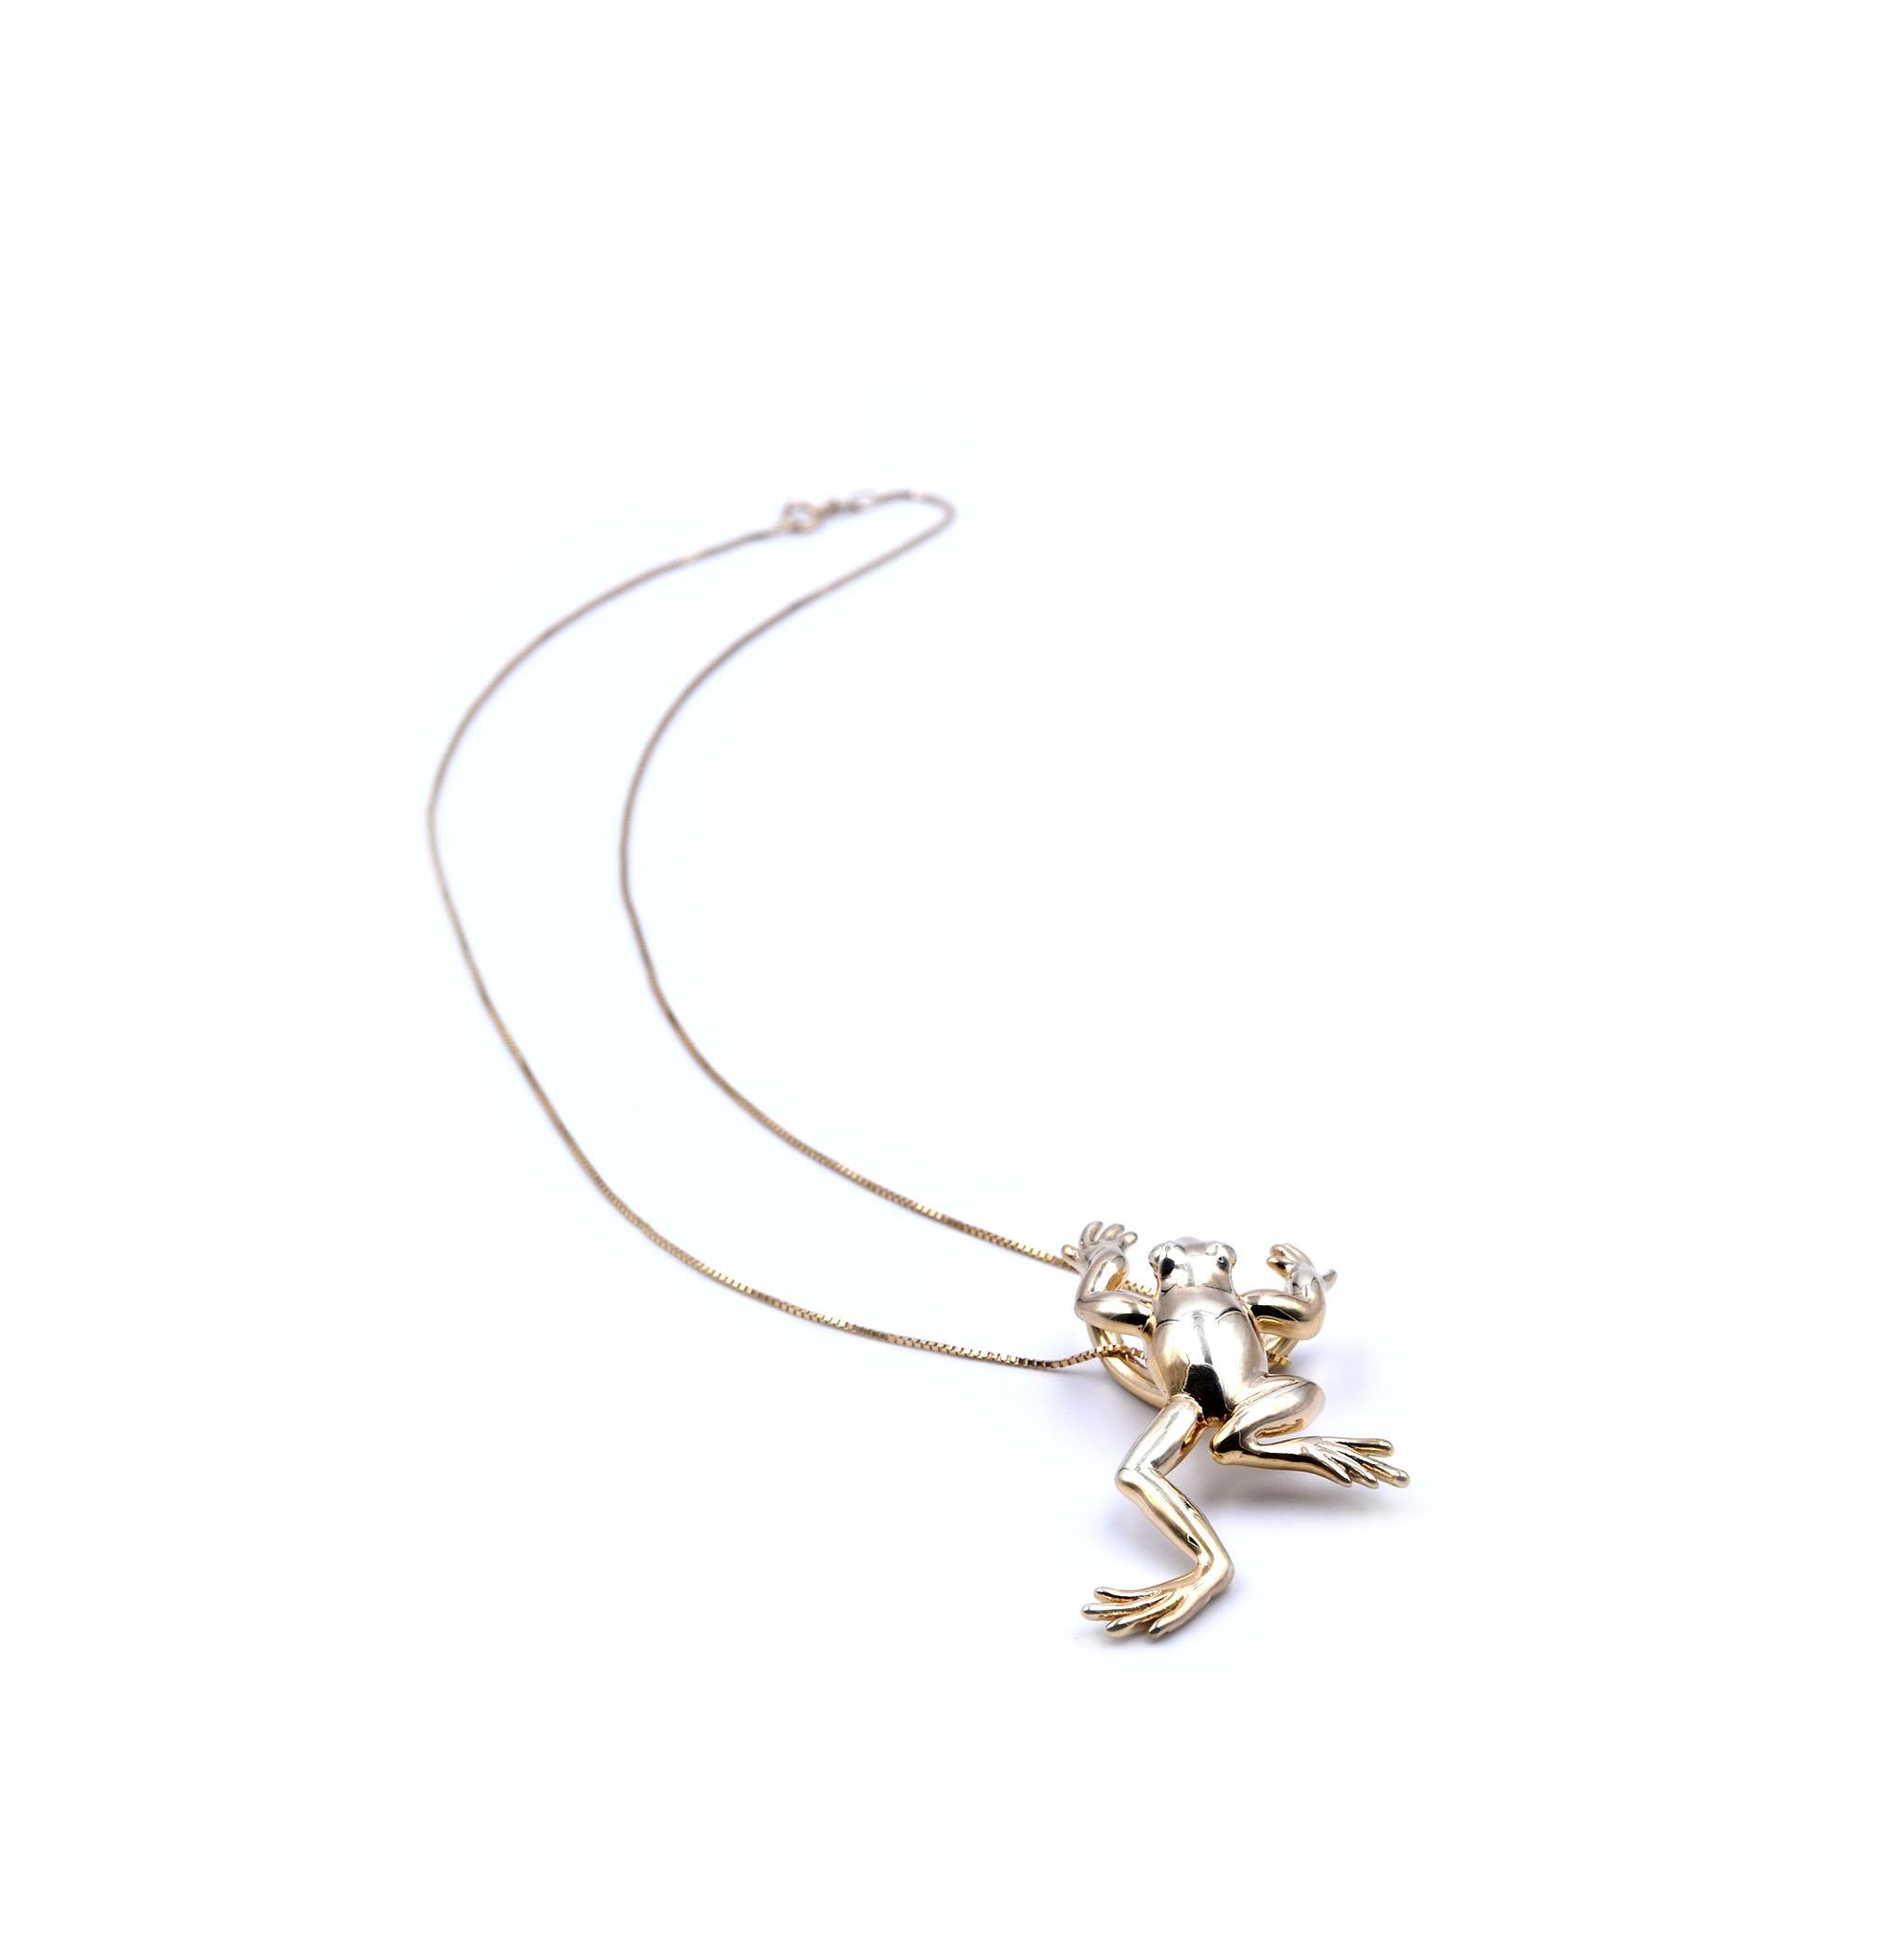 Designer: custom designed
Material: 14k yellow gold
Dimensions: necklace is 18-inches long, frog pendant is 32.55mm by 49.82mm
Weight: 3.71 grams
